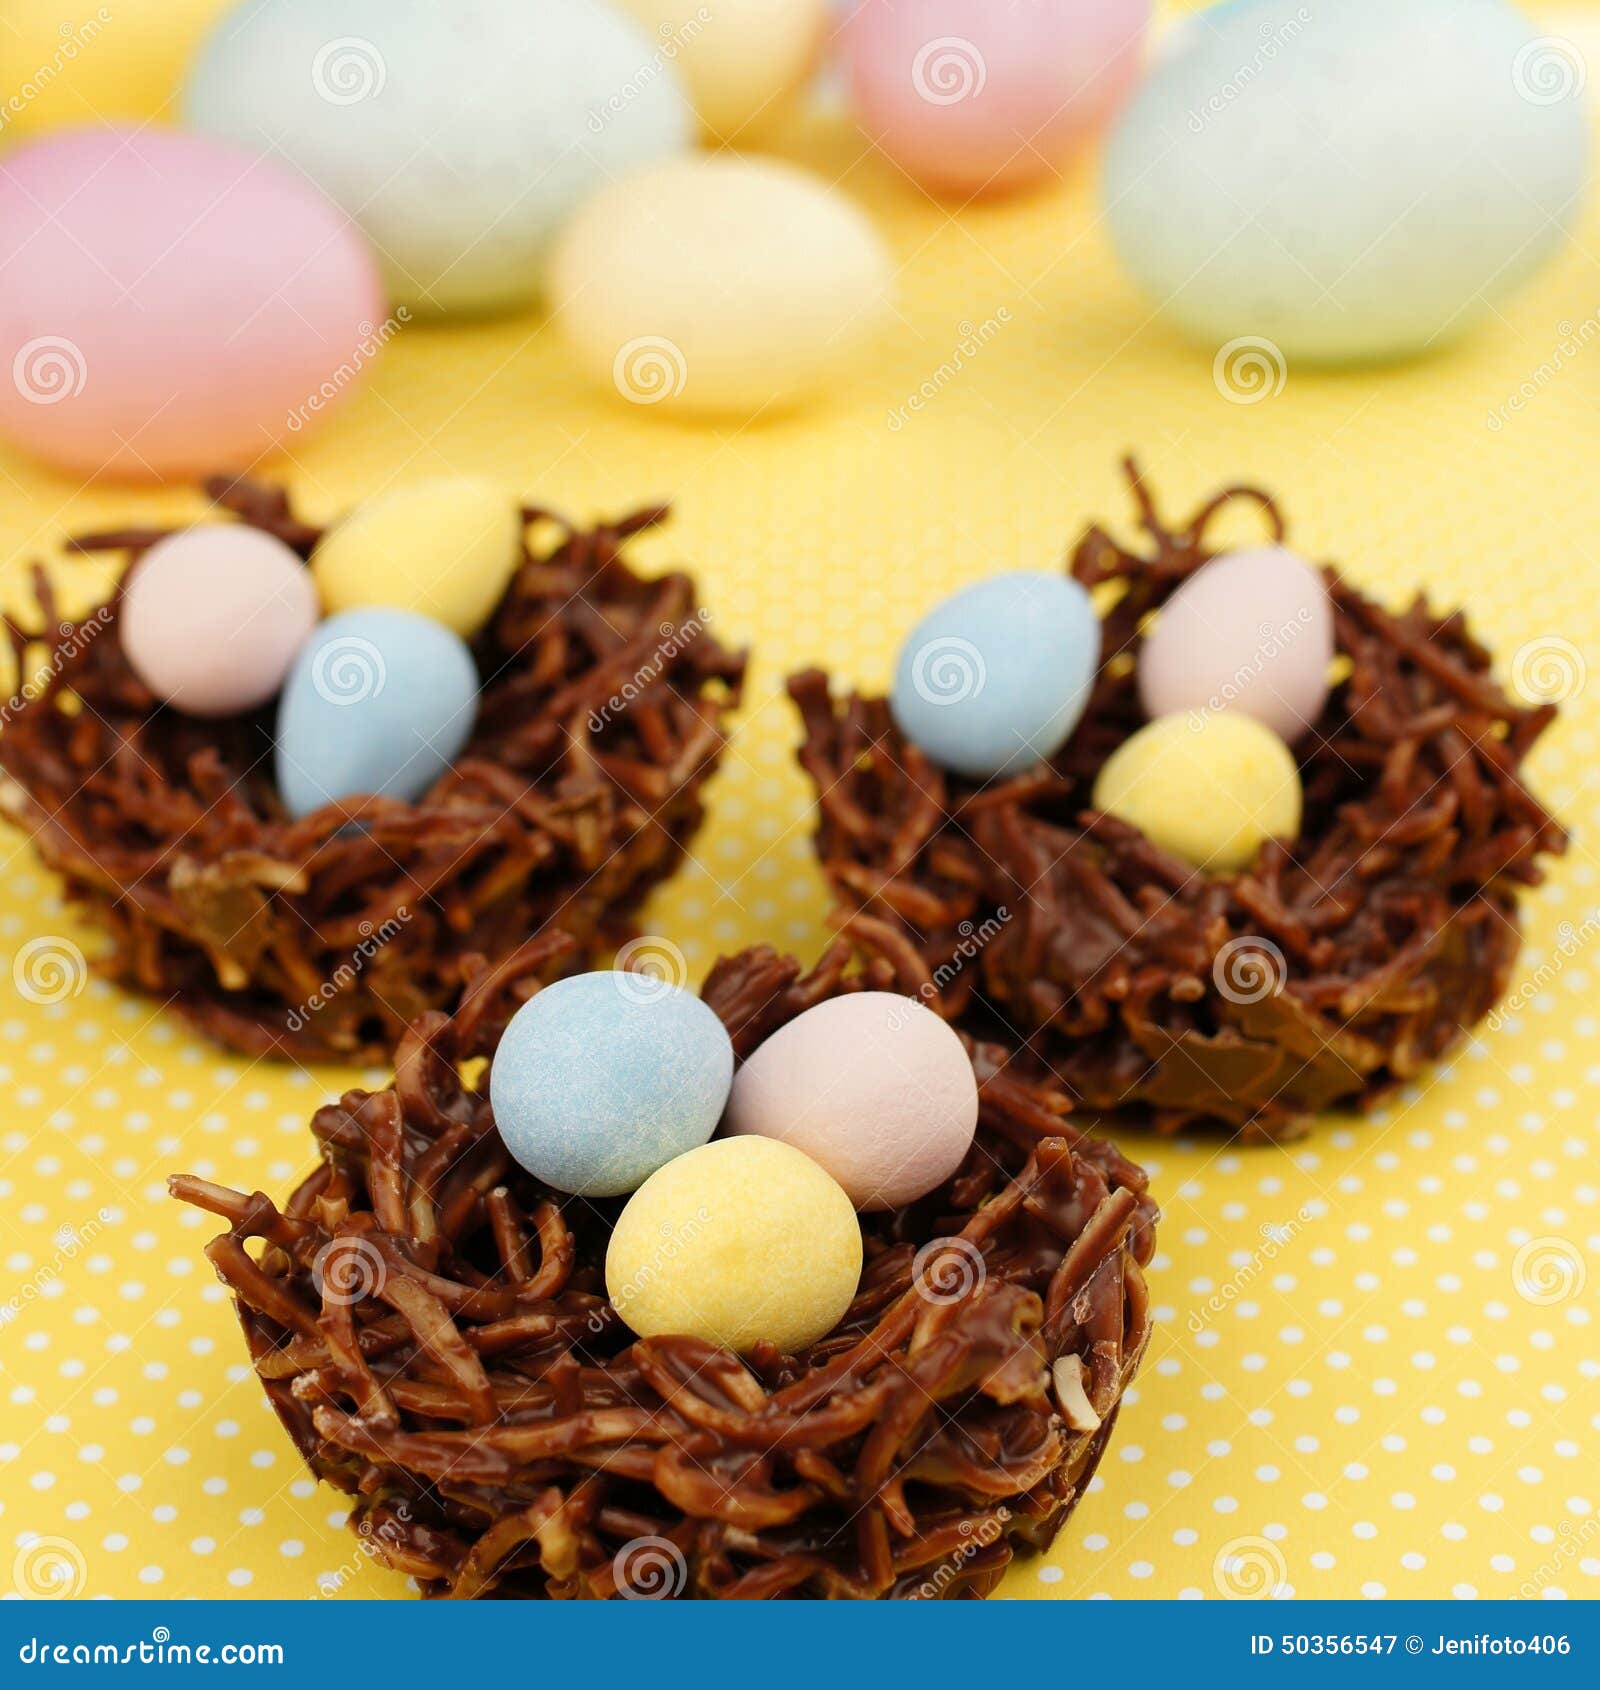 springtime chocolate nests filled with easter eggs on yellow